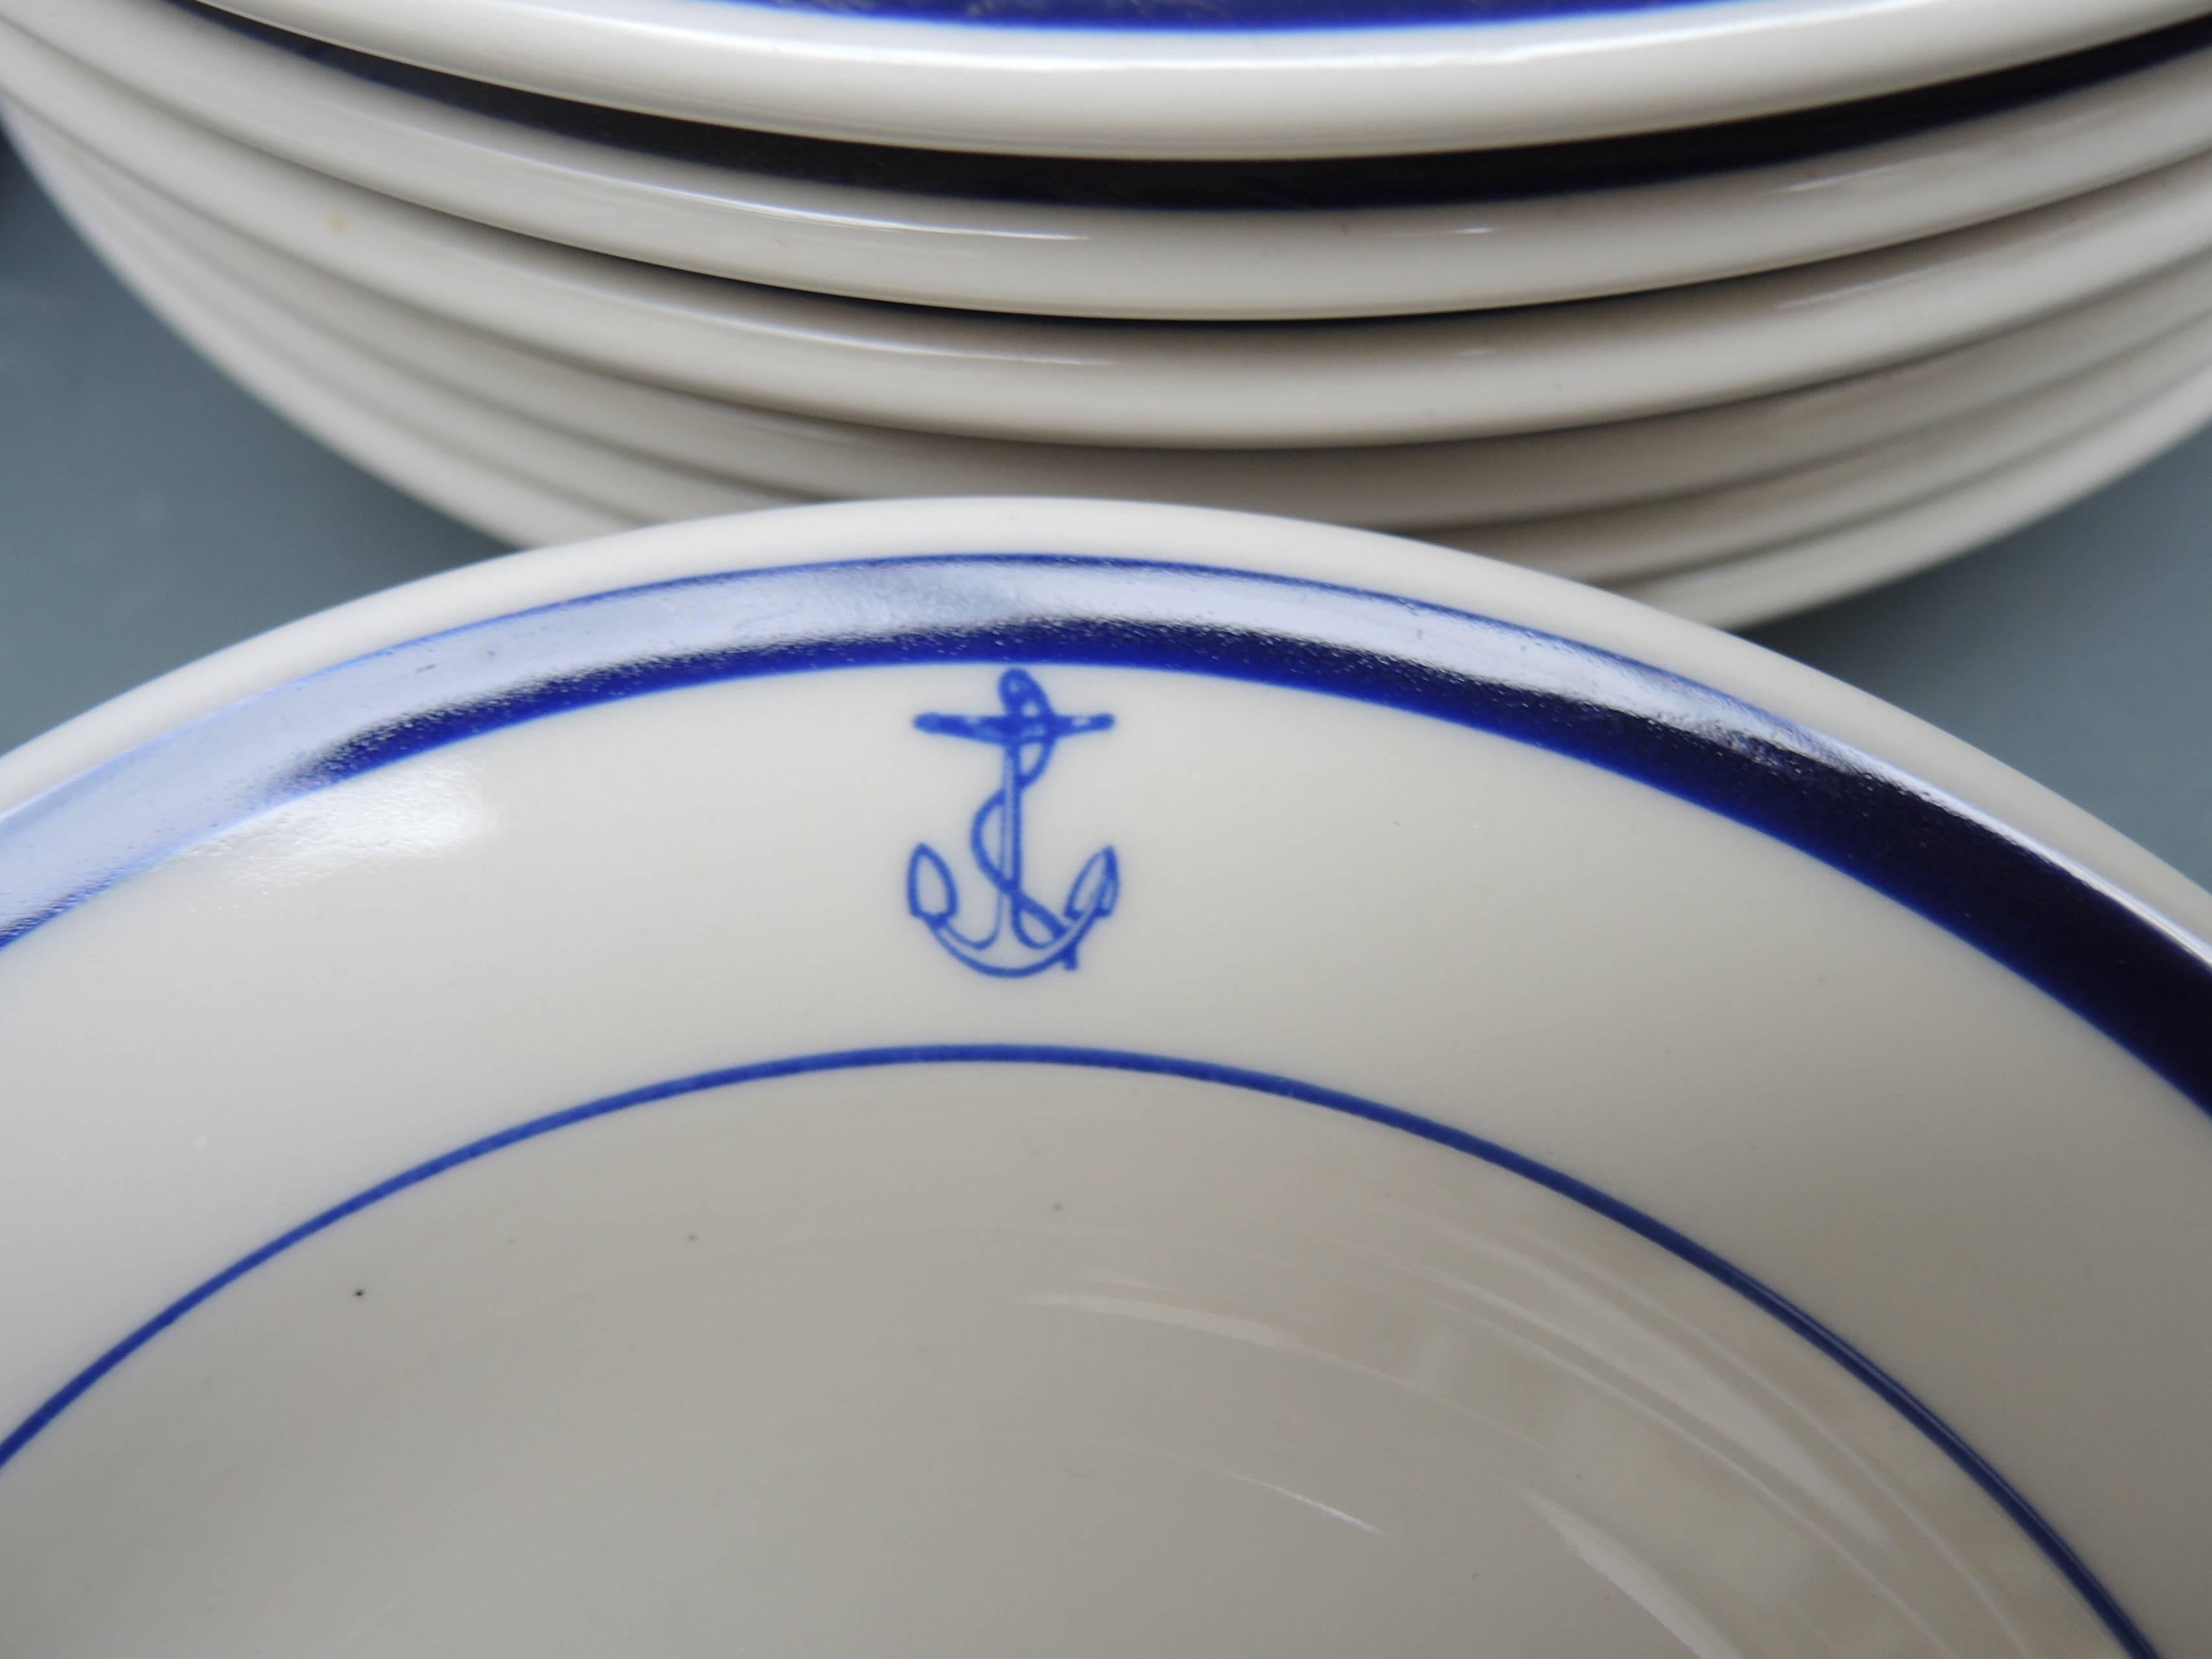 A complete 31 piece set of blue and white American nautical  Junior Navy Officers dinnerware made by the Homer Laughlin Company of Newell West Virginia, USA.
Six dinner plates
Six large soup bowls
Six small bowls
Six bread plates
Six dessert